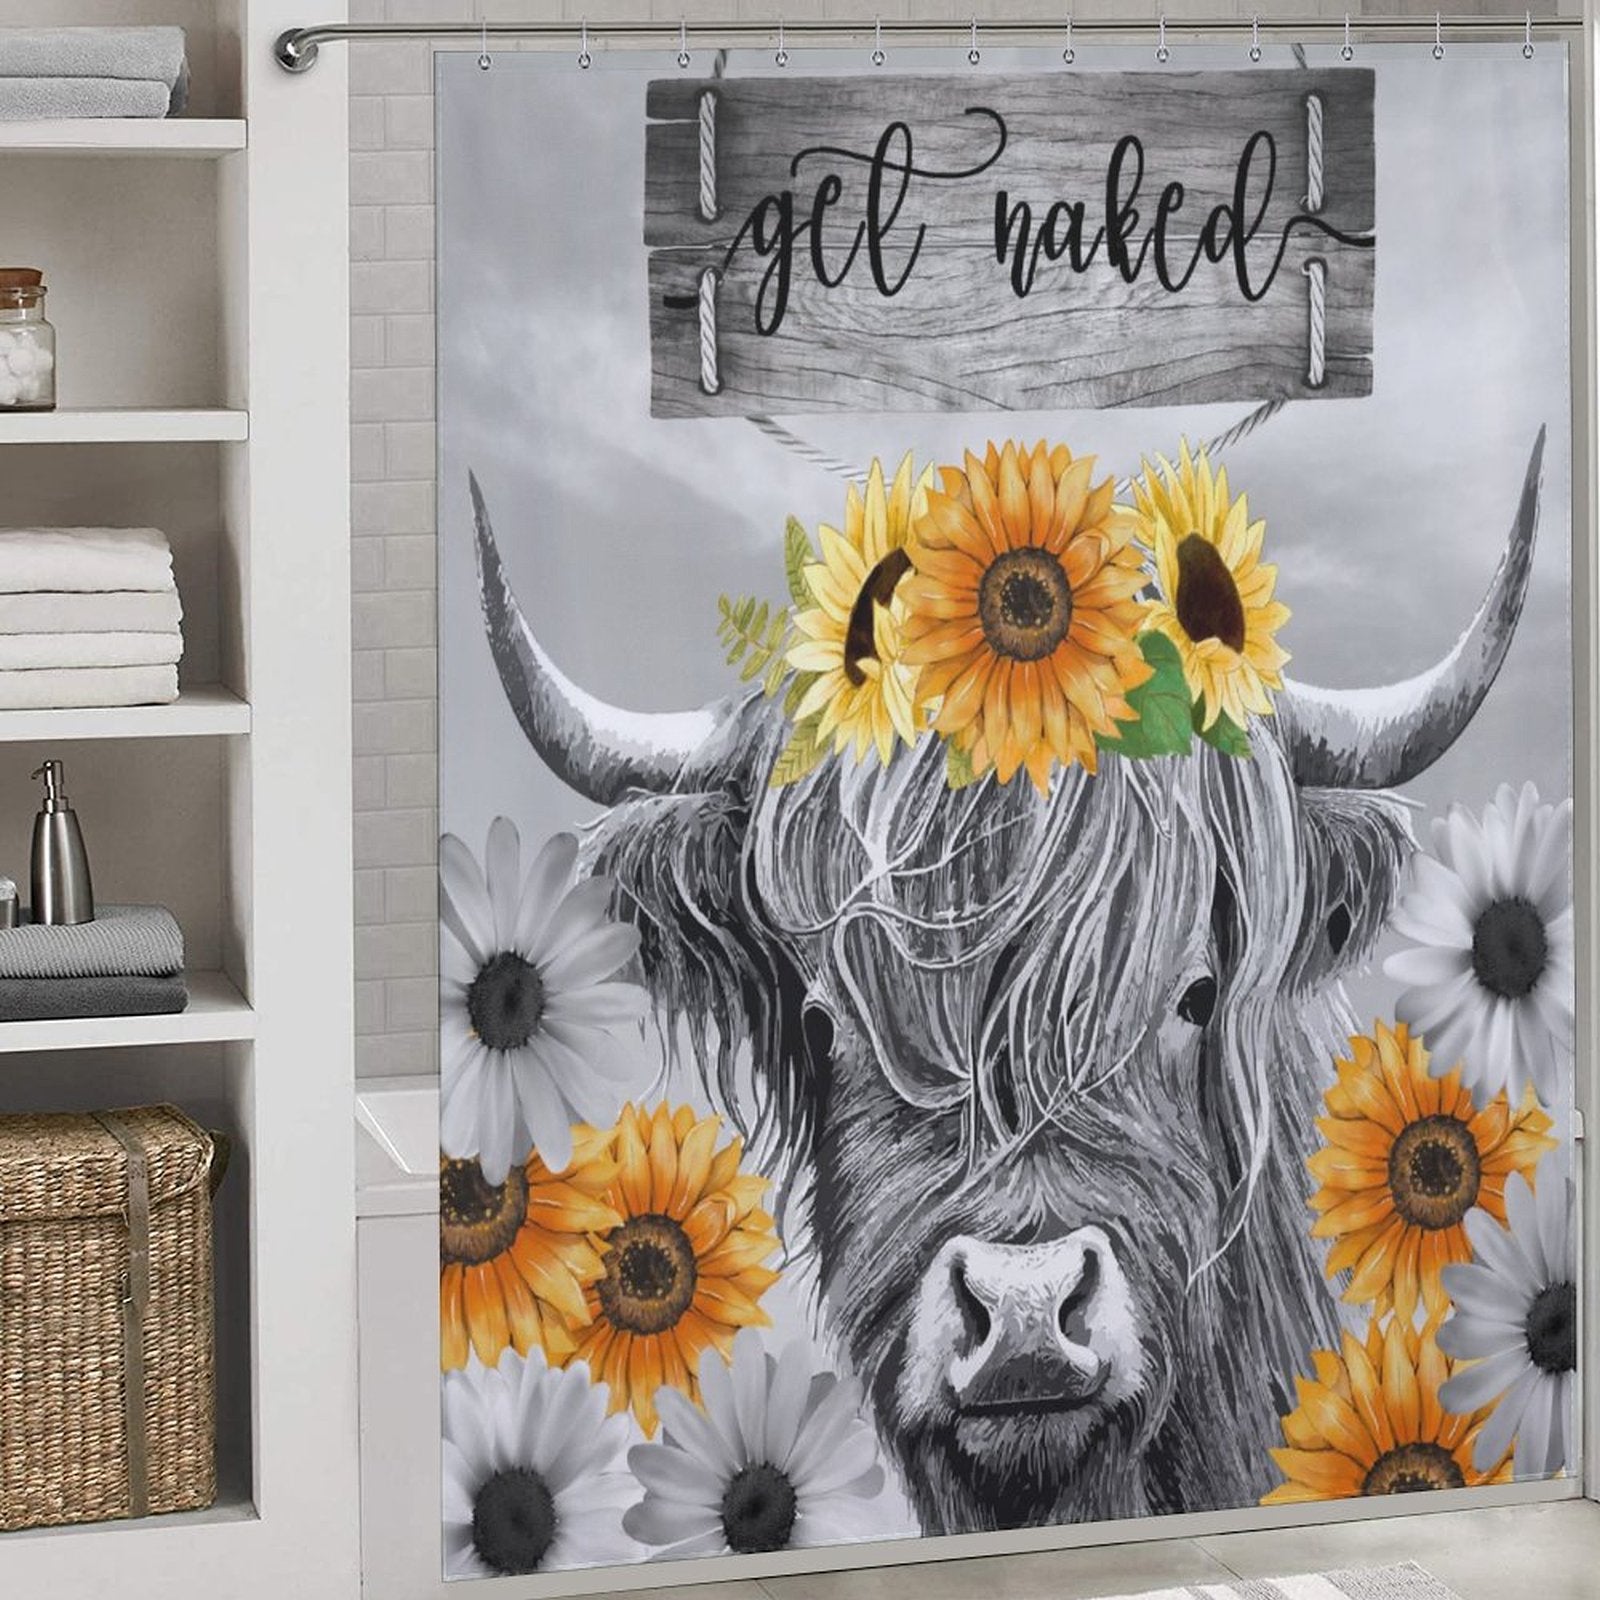 Highland Cow Black and White Funny Letters Sunflower Get Naked Shower Curtain-Cottoncat featuring a charming cow wearing a sunflower crown, surrounded by sunflowers and daisies, with a whimsical sign above reading "get naked." Perfectly combines rustic charm and cheeky humor.